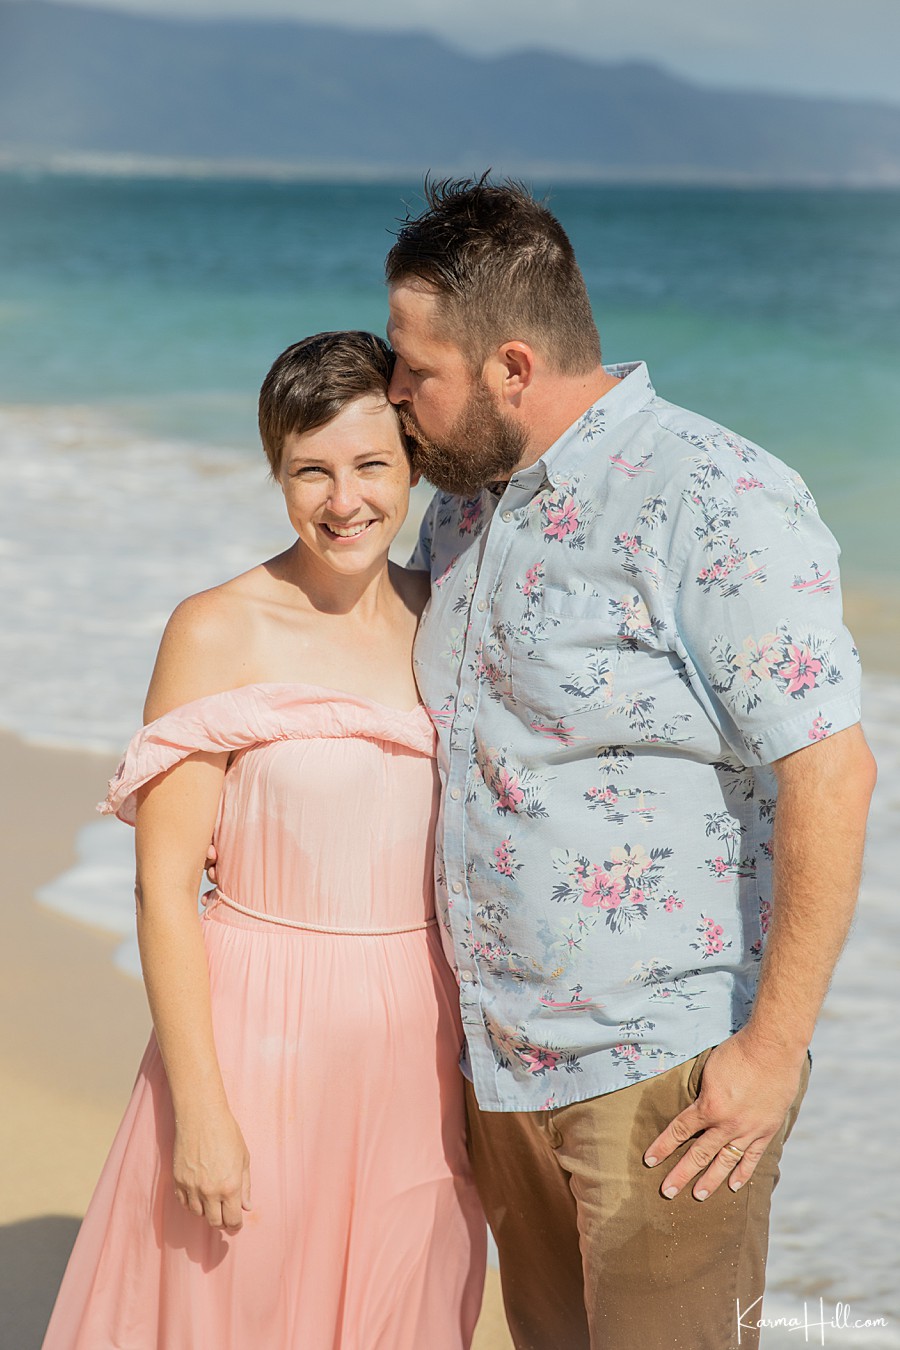 Family Photography in Maui